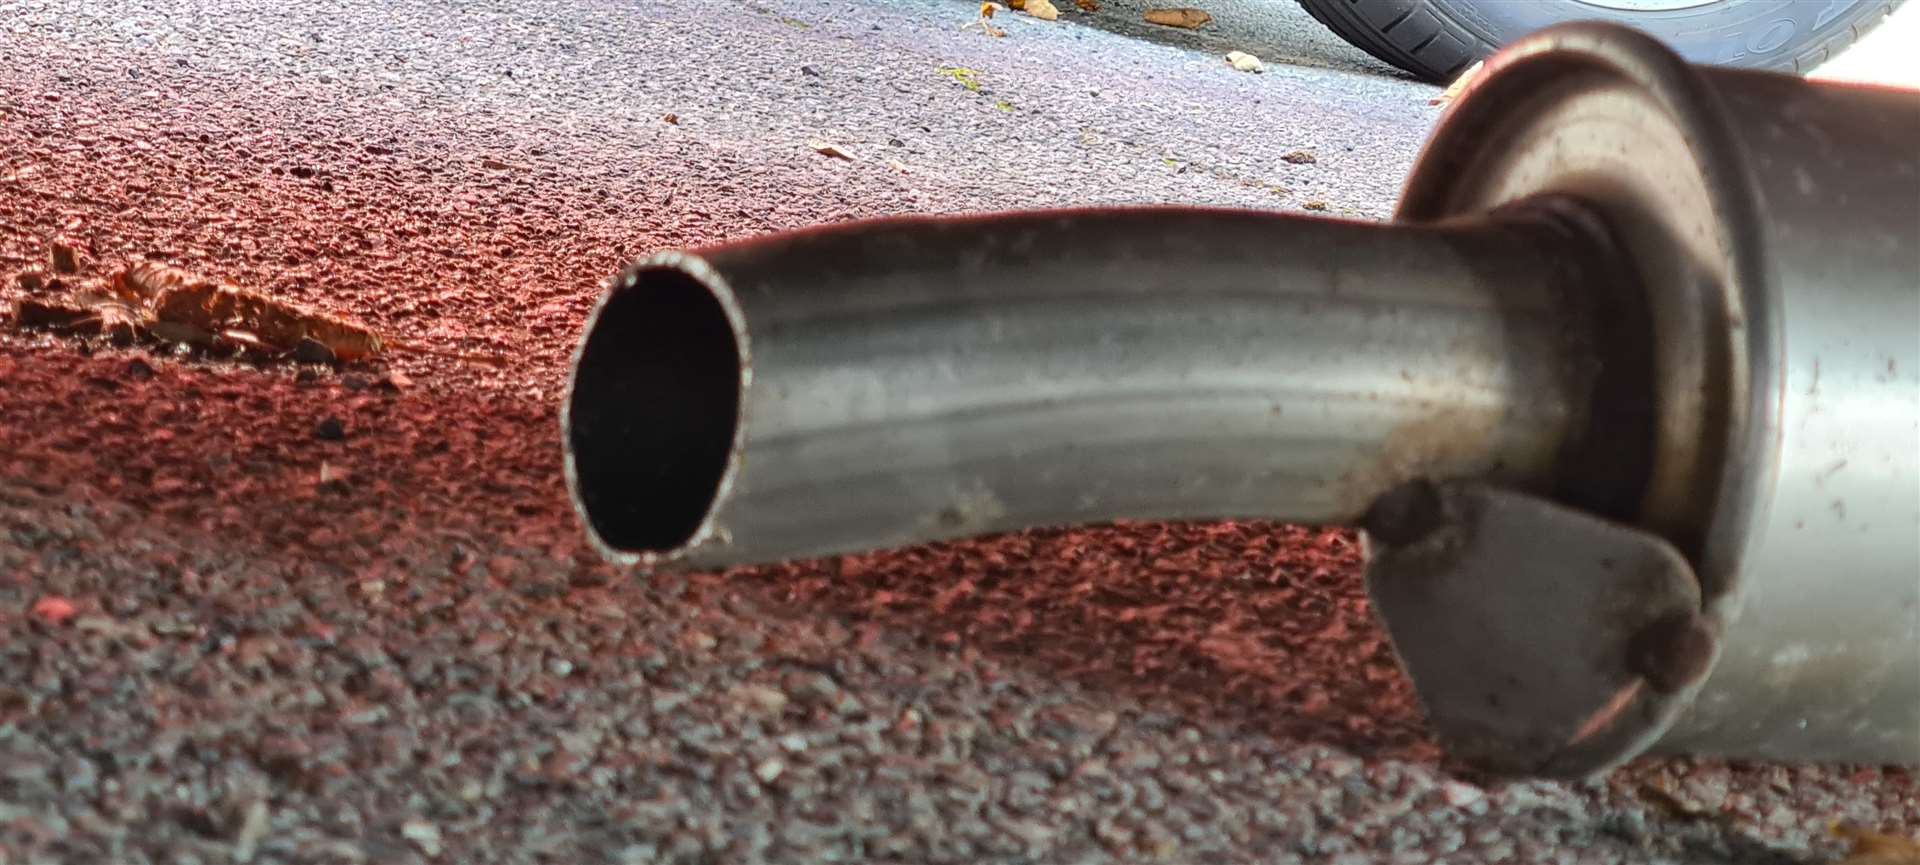 The Metropolitan Police will mark and register catalytic converters free of charge